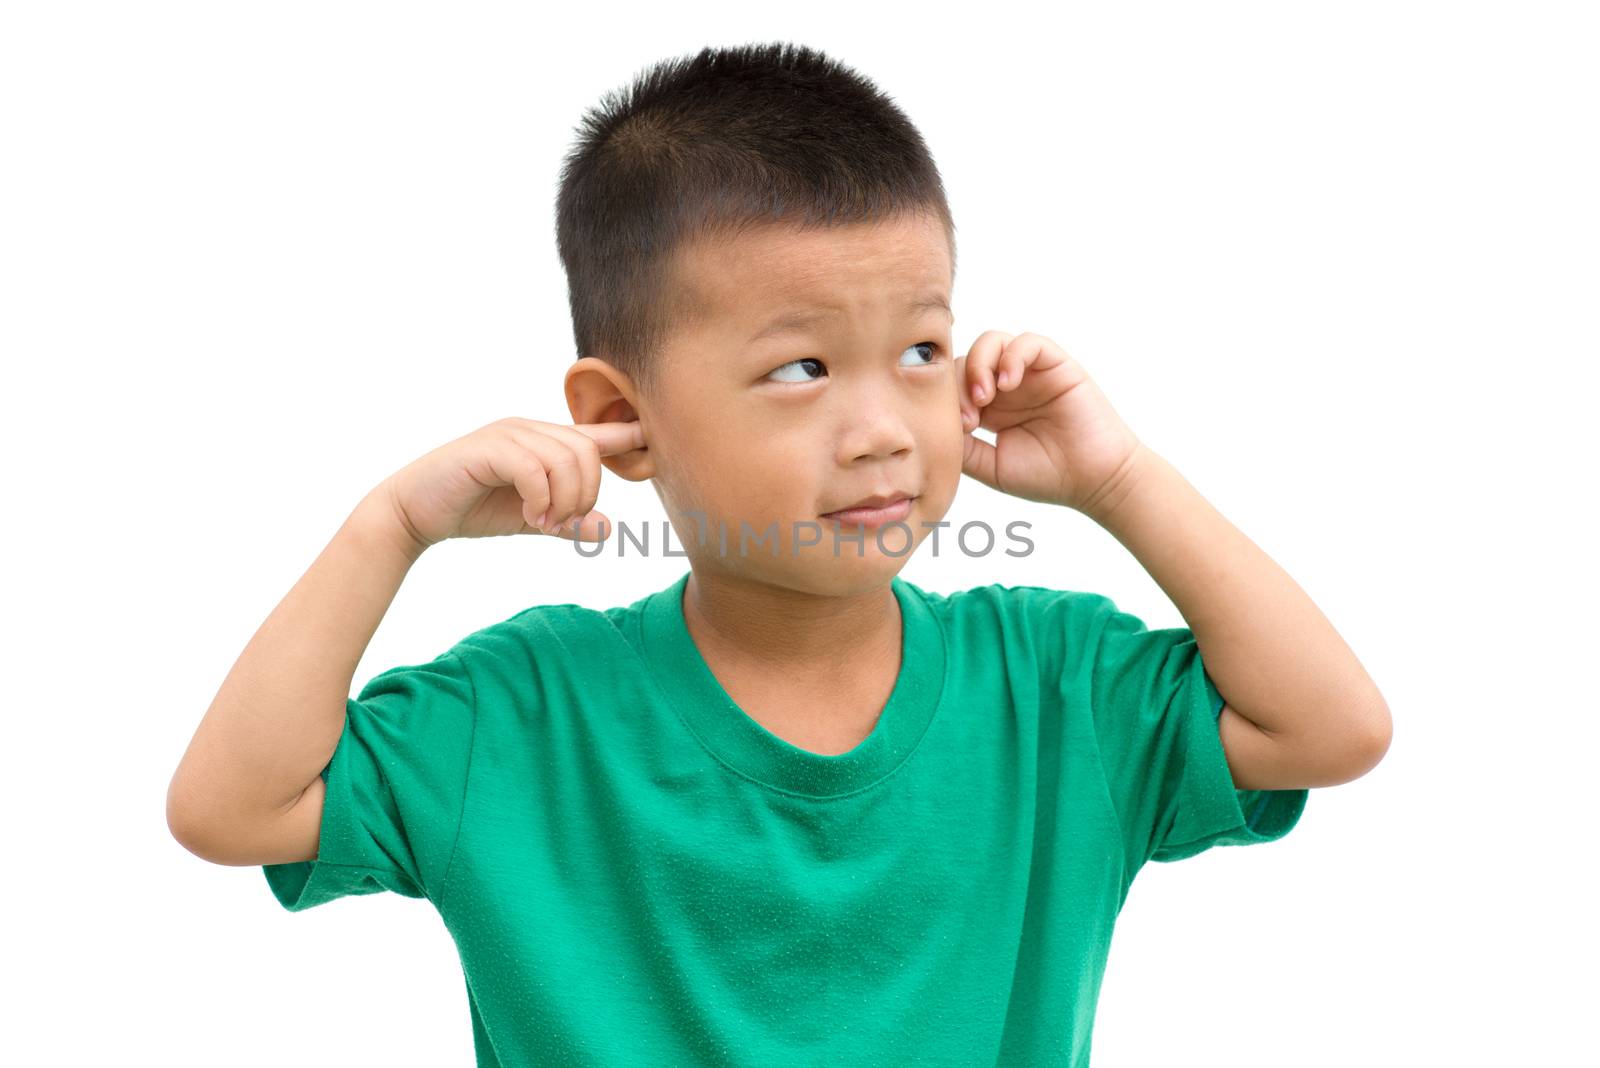 Asian child covering ears with hands and looking away. Portrait of young boy isolated on white background.